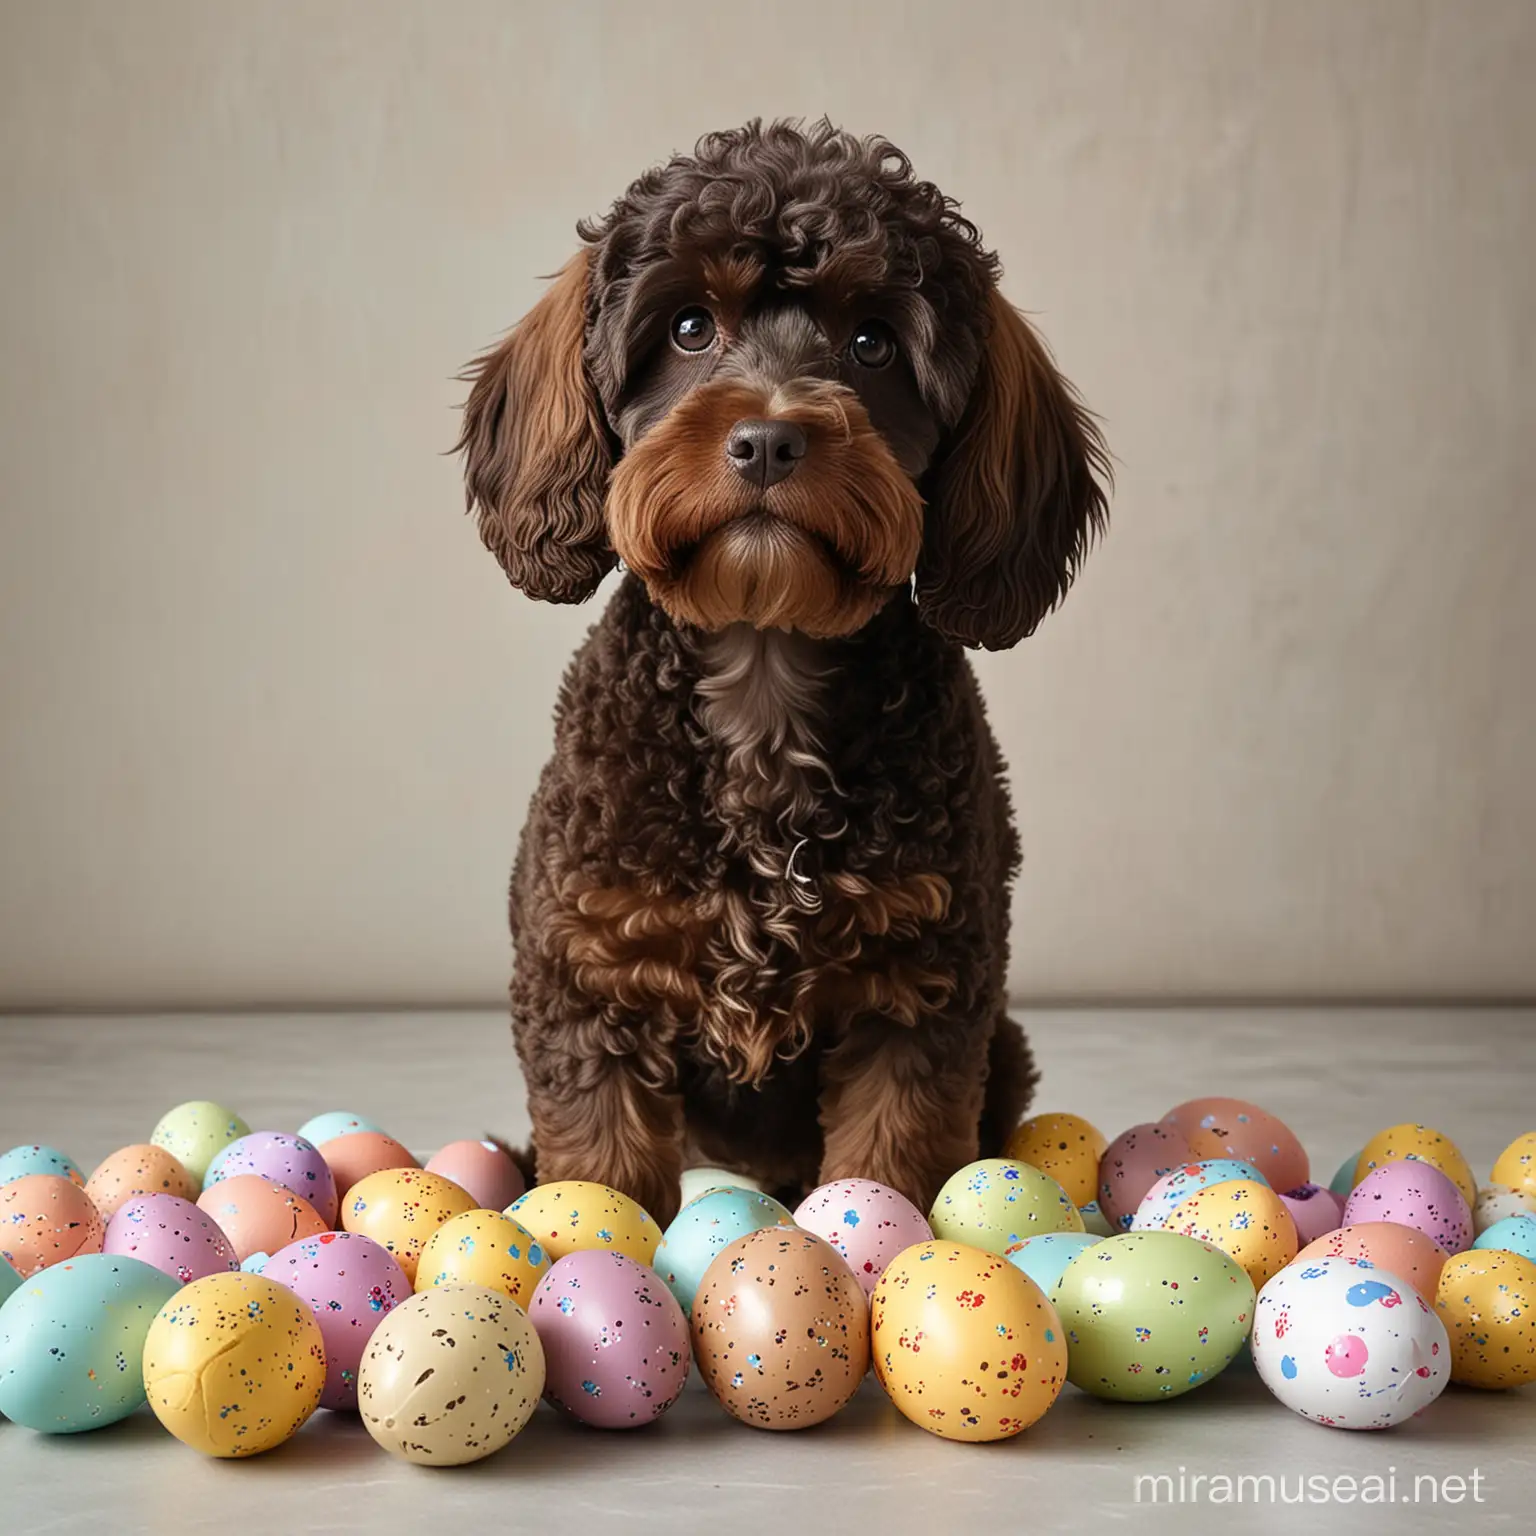 Adorable Cockapoo Surrounded by Easter Eggs